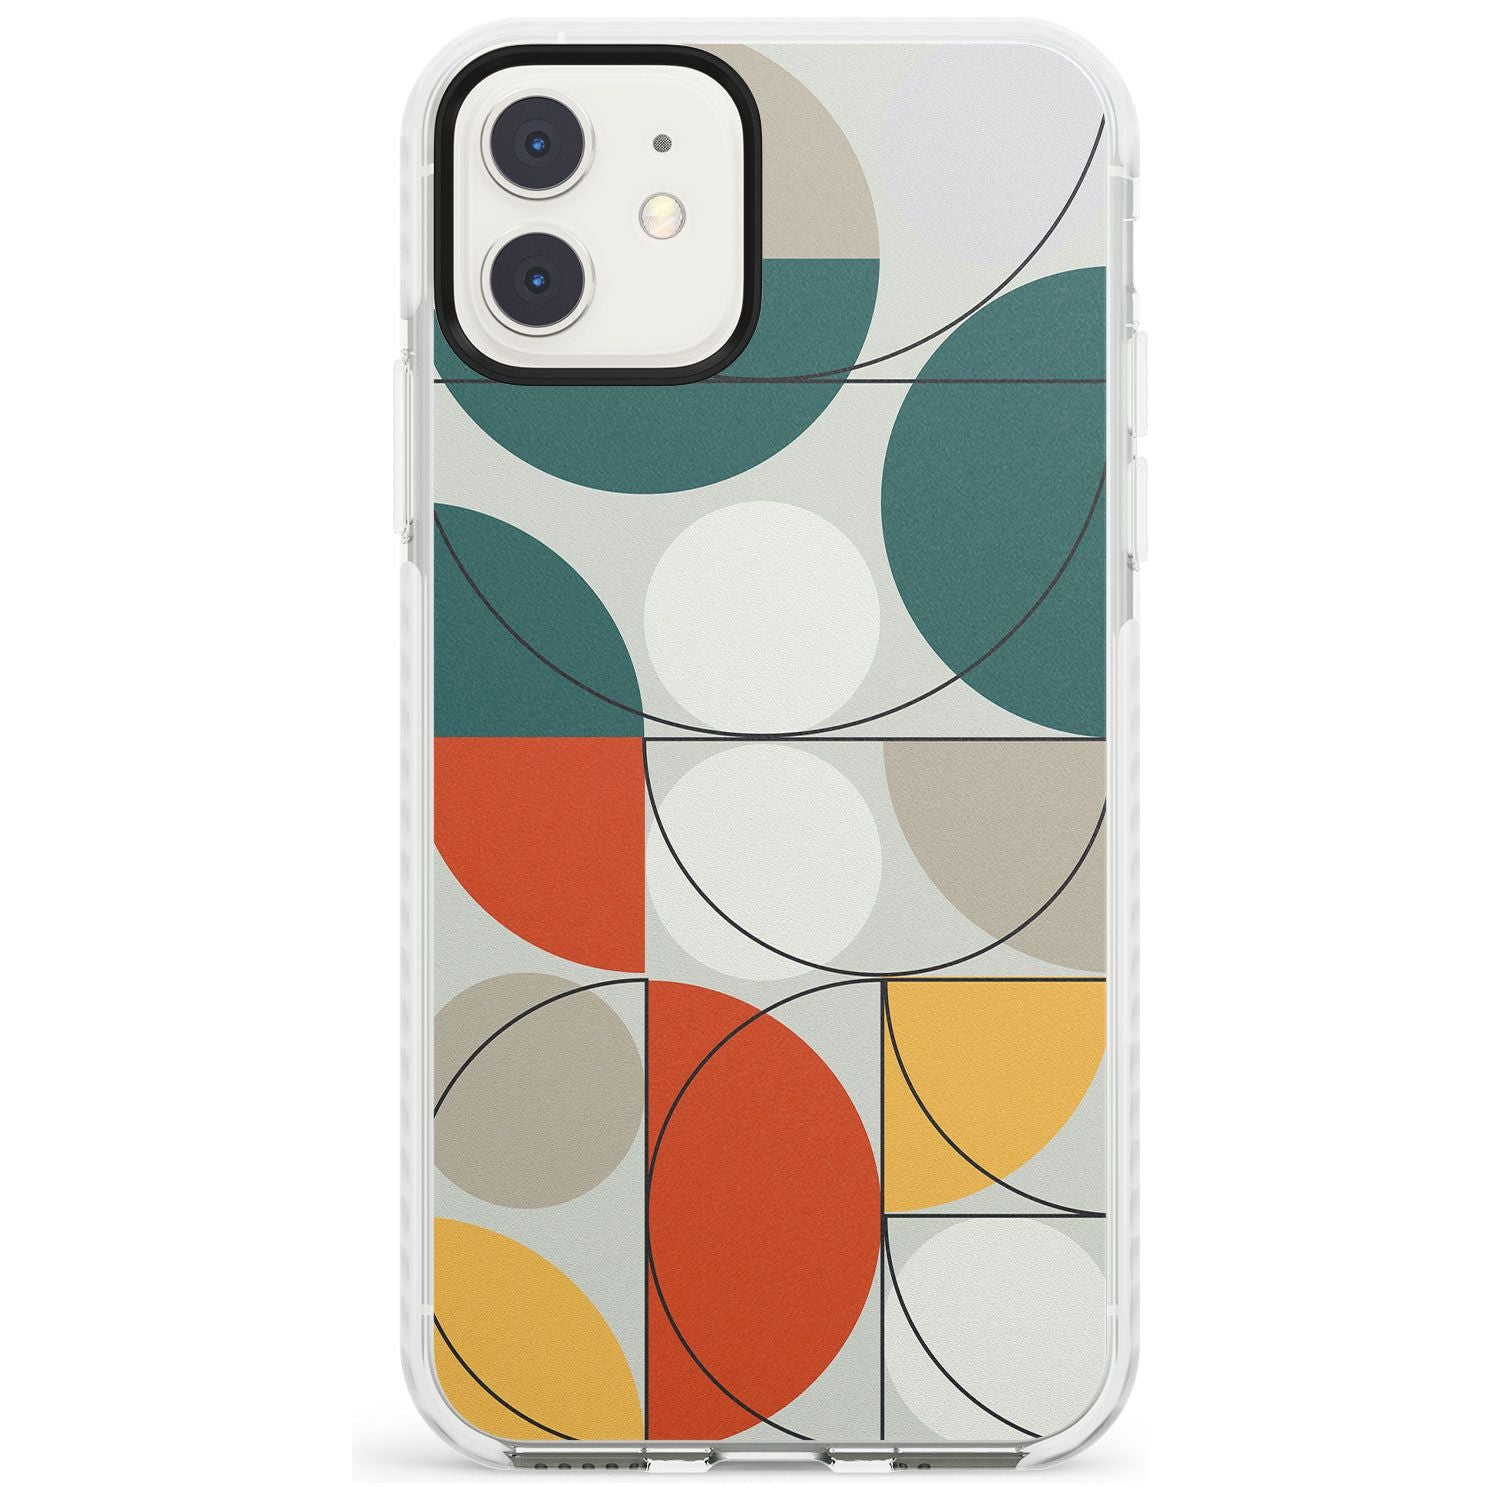 Abstract Half Circles Impact Phone Case for iPhone 11